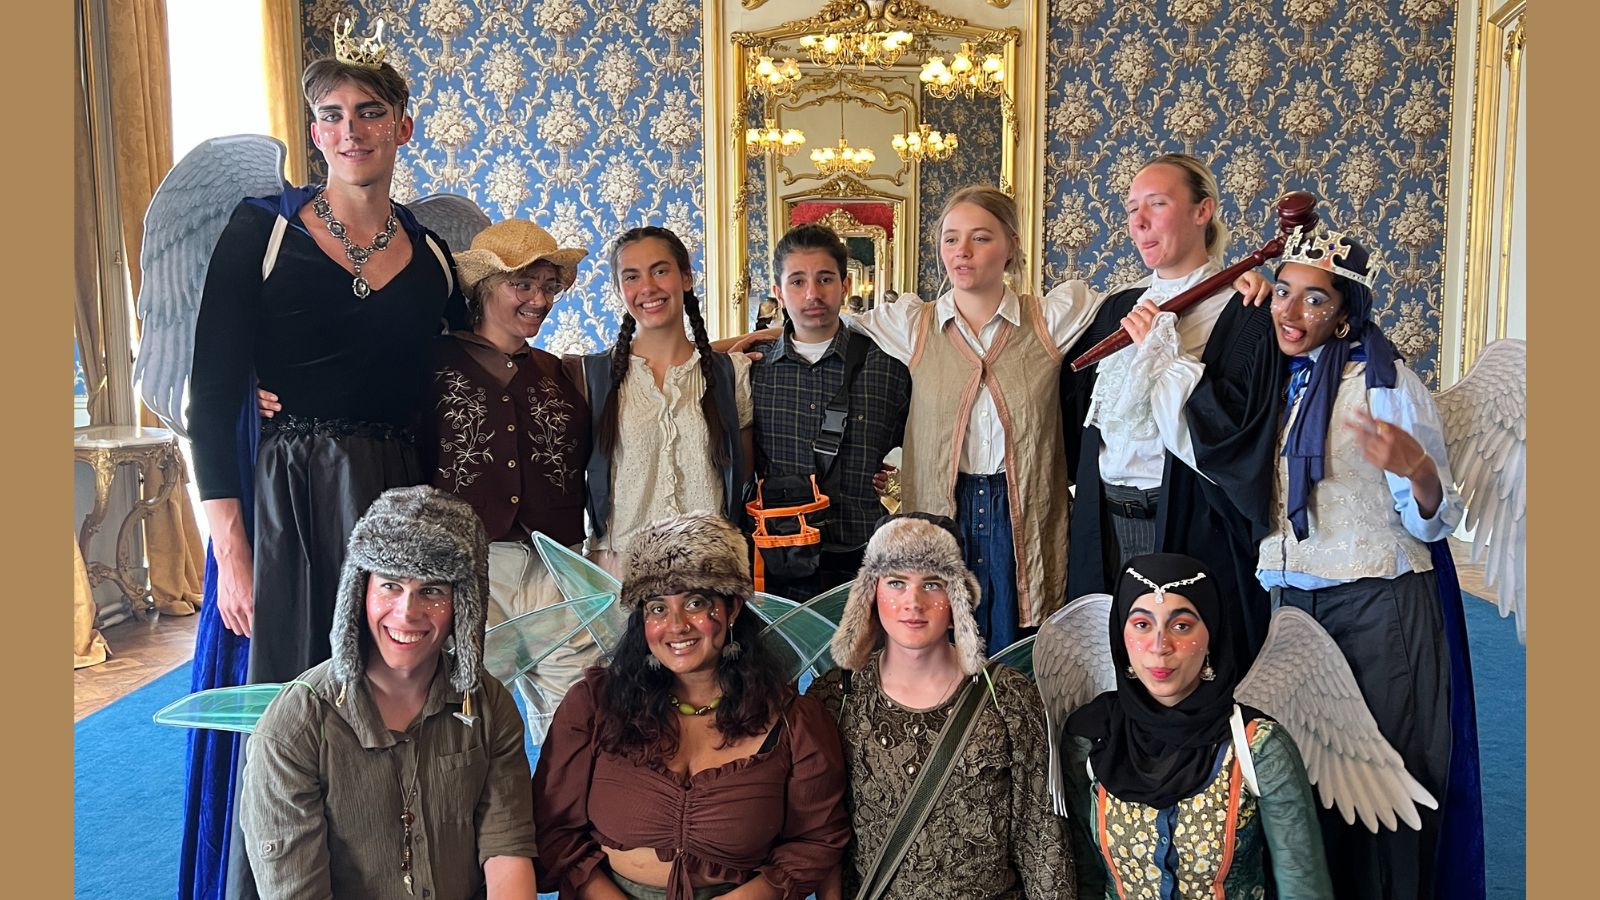 A photo of a group of students dressed in costumes to perform a play in a historic house